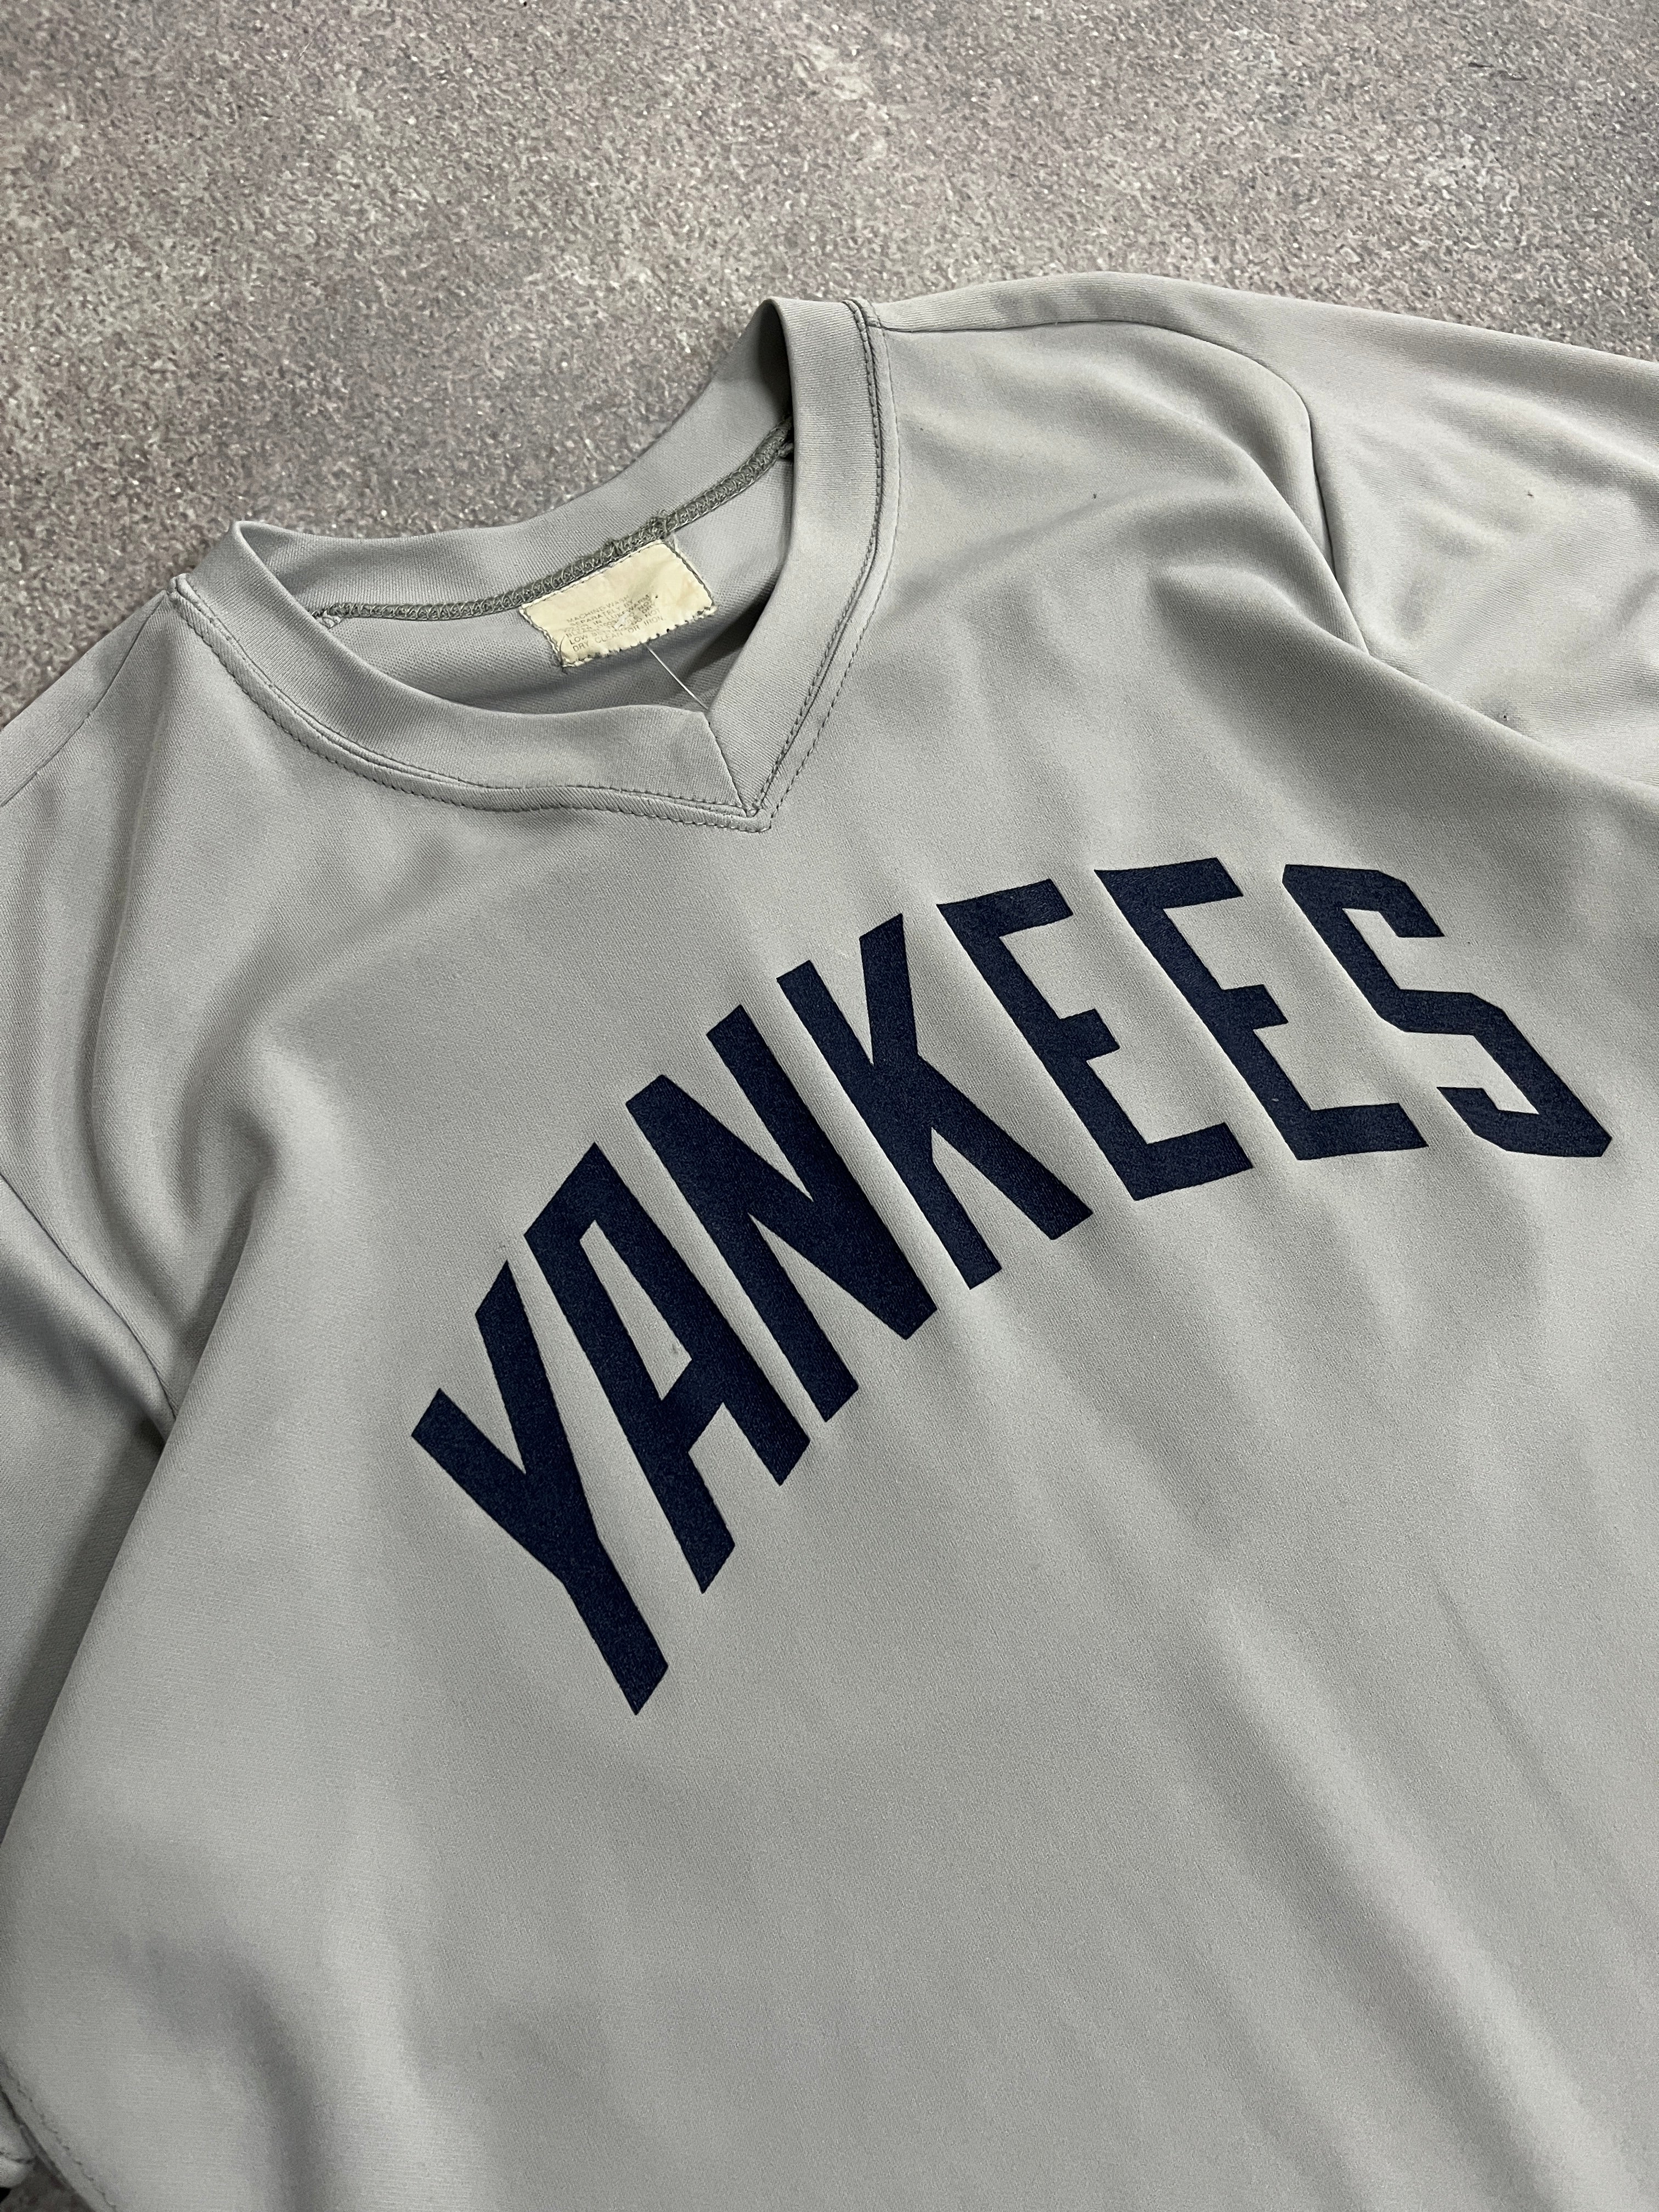 Vintage Yankees Jersey T Shirt Grey // Small - RHAGHOUSE VINTAGE